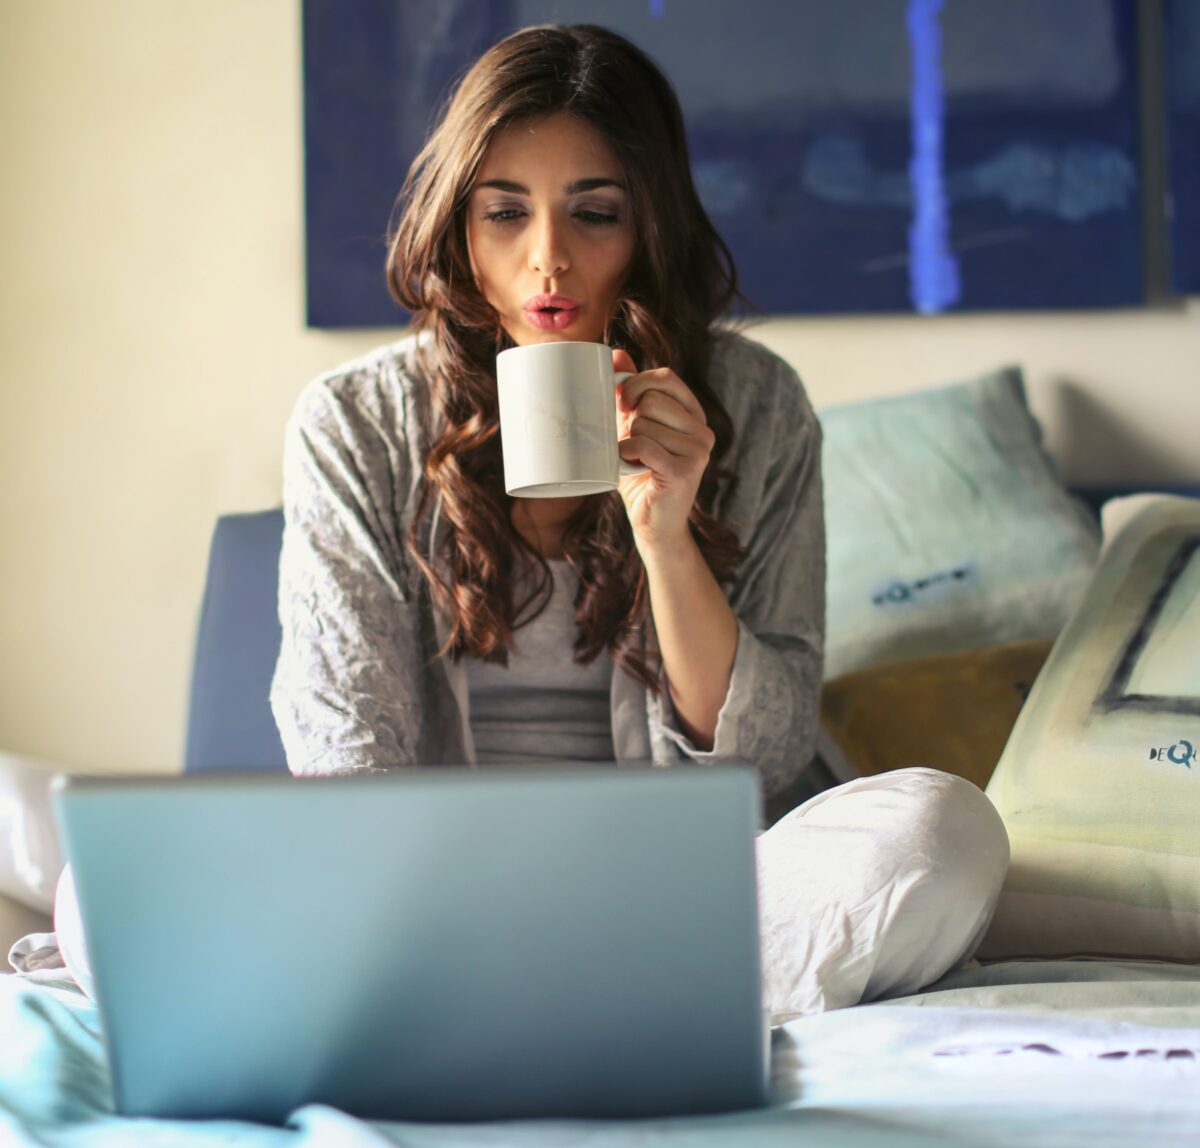 Woman sitting on bed, drinking from mug, and looking at her computer.